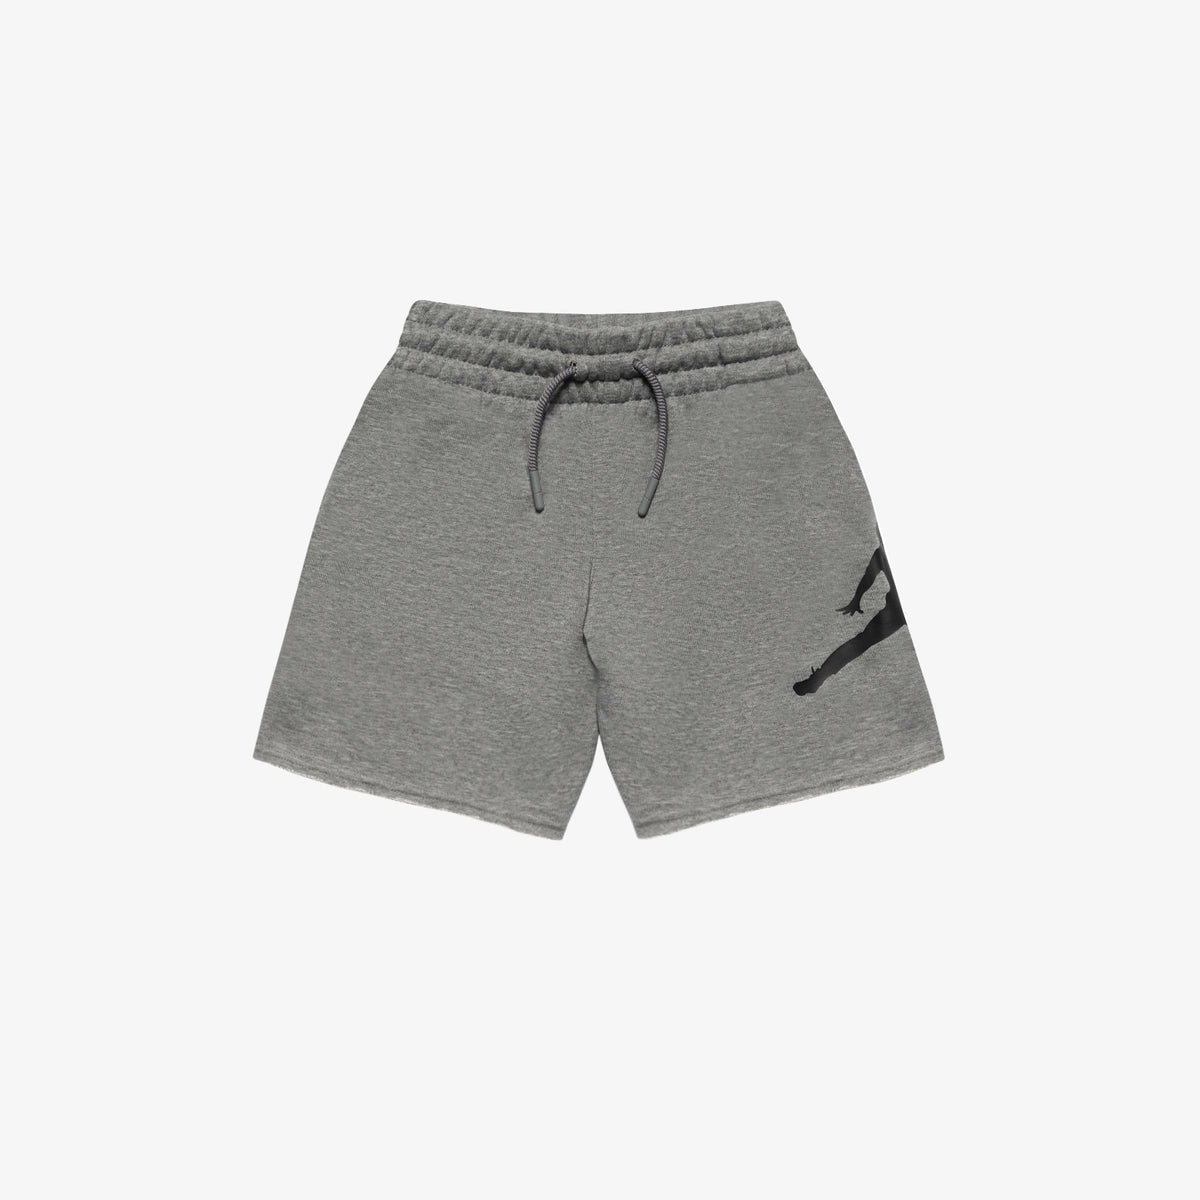 Jumpman Air French Terry Youth Shorts - Grey